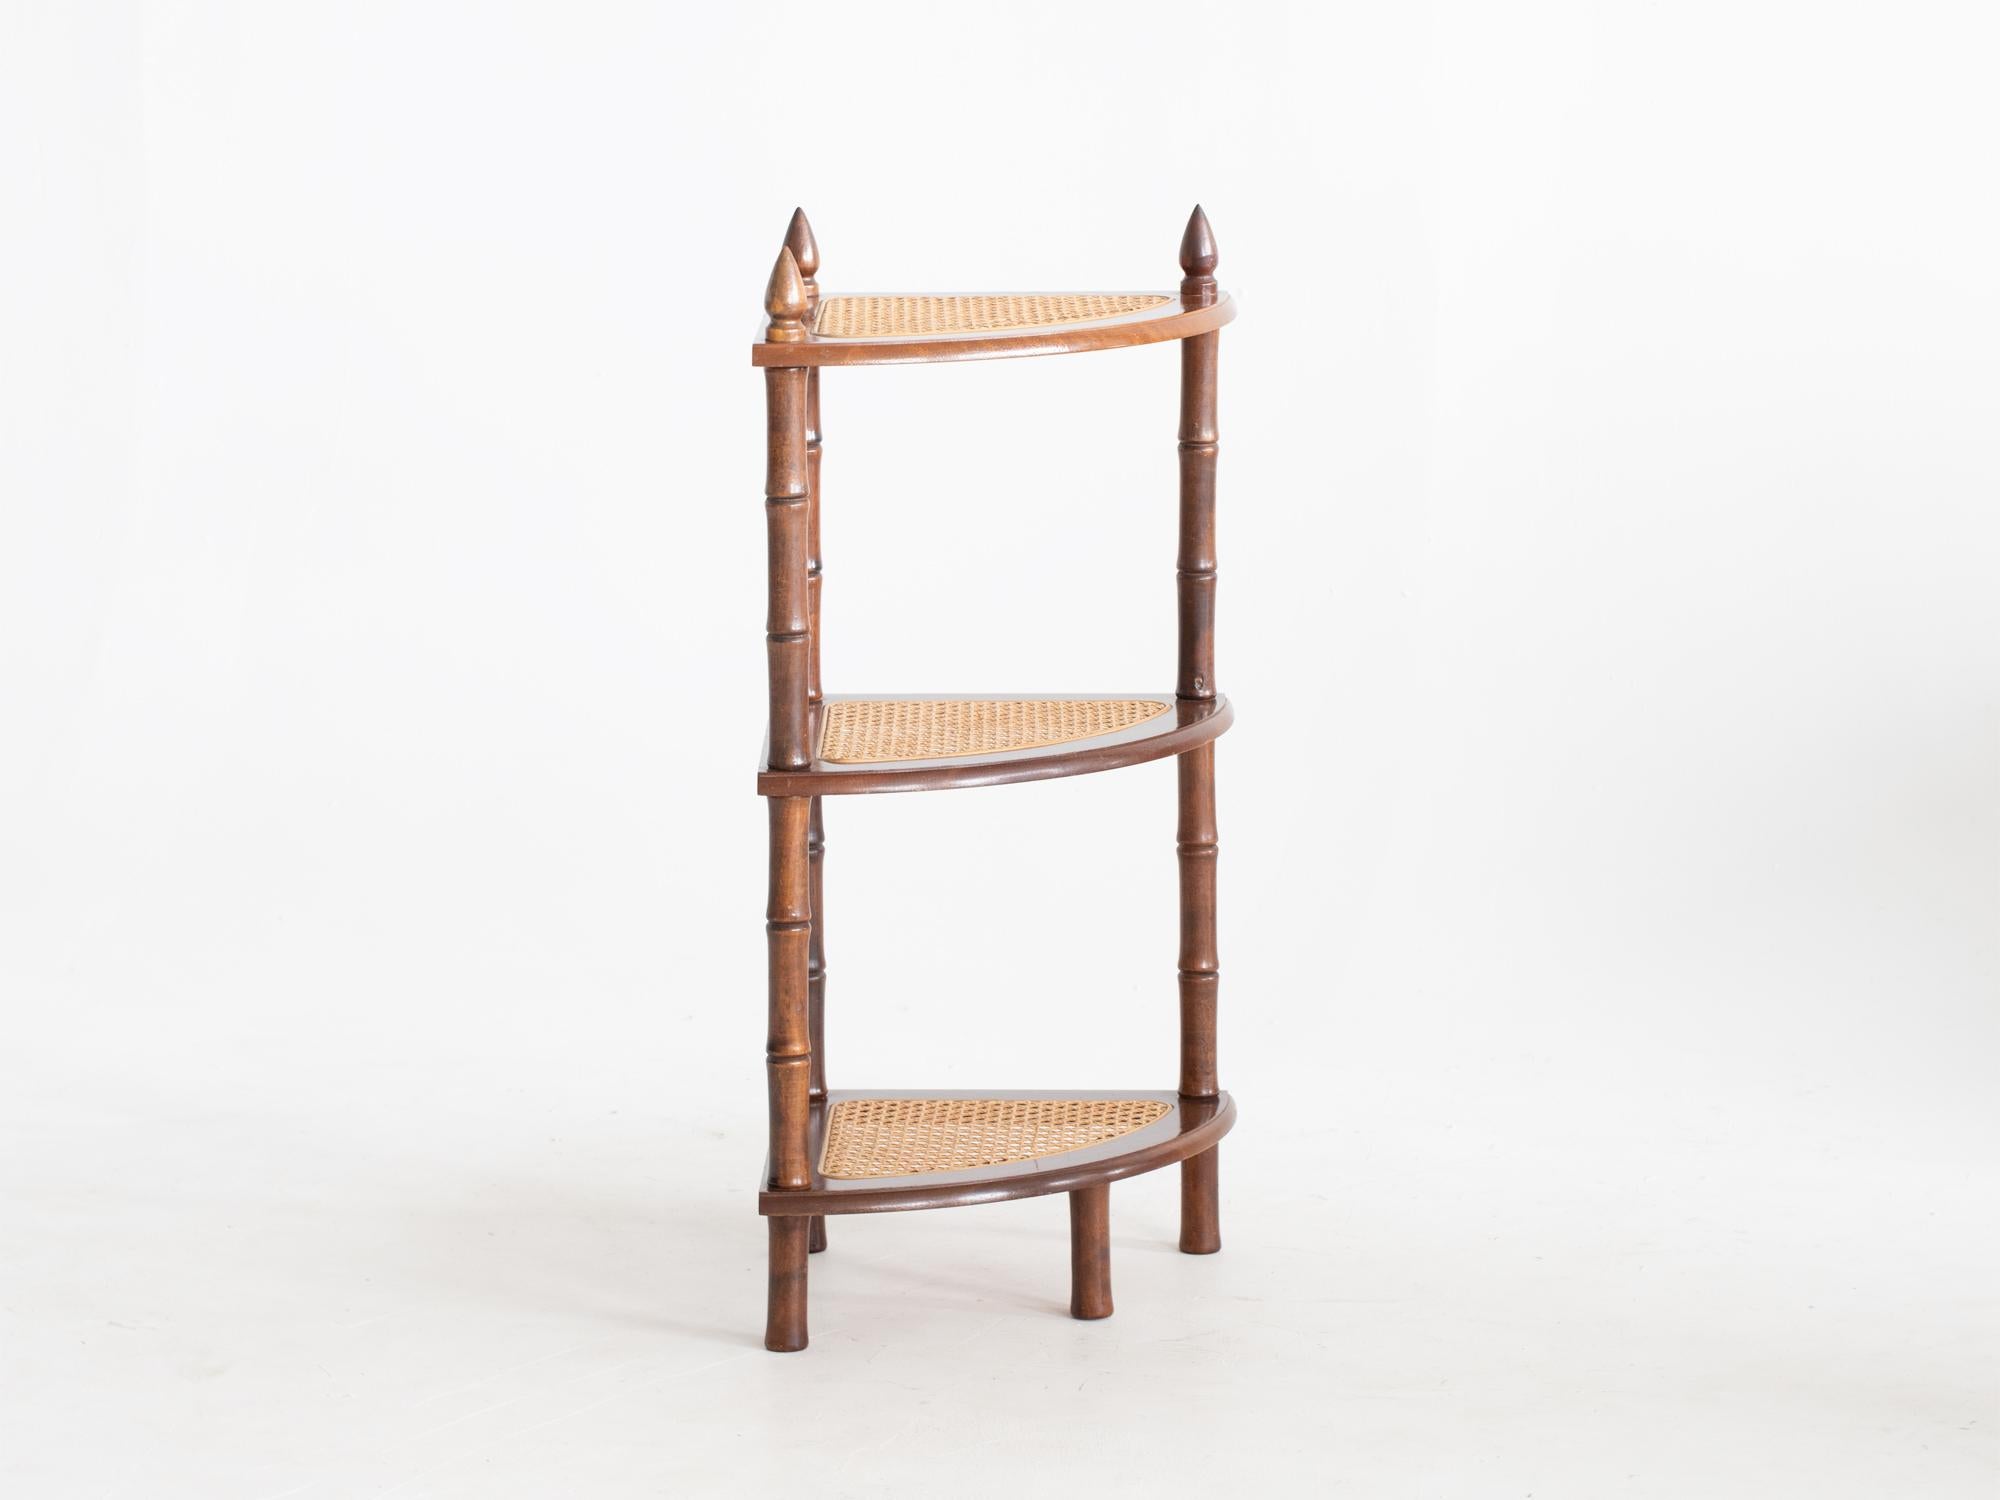 A tiered faux bamboo mahogany etagere with caned panels. English, mid-late 20C.

Stock ref. #2392

In good sturdy order with light cosmetic wear.

77 x 33.5 x 33.5 cm

30.3 x 13.2 x 13.2 